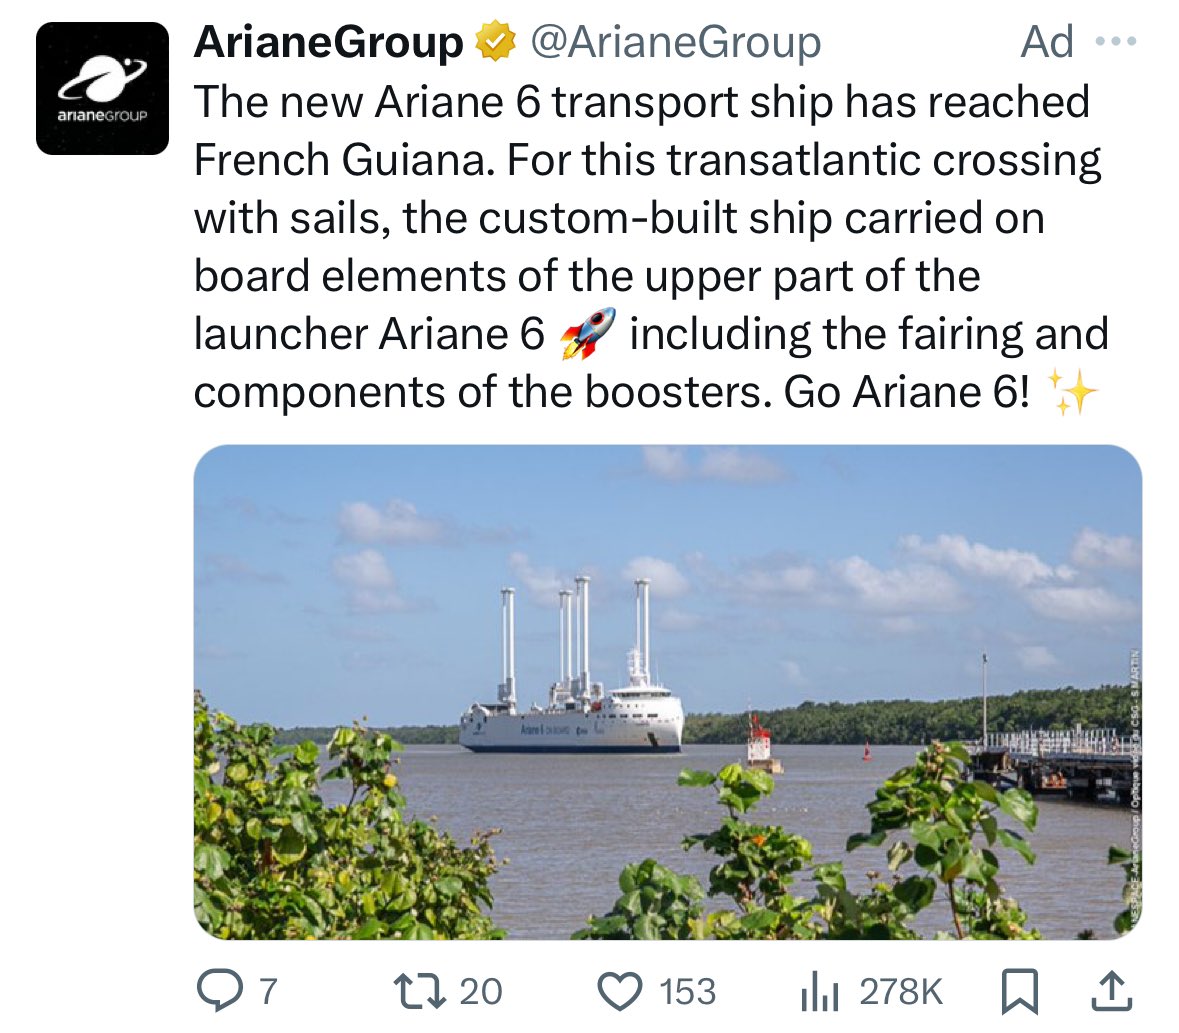 Why is ArianeSpace posting ads?????